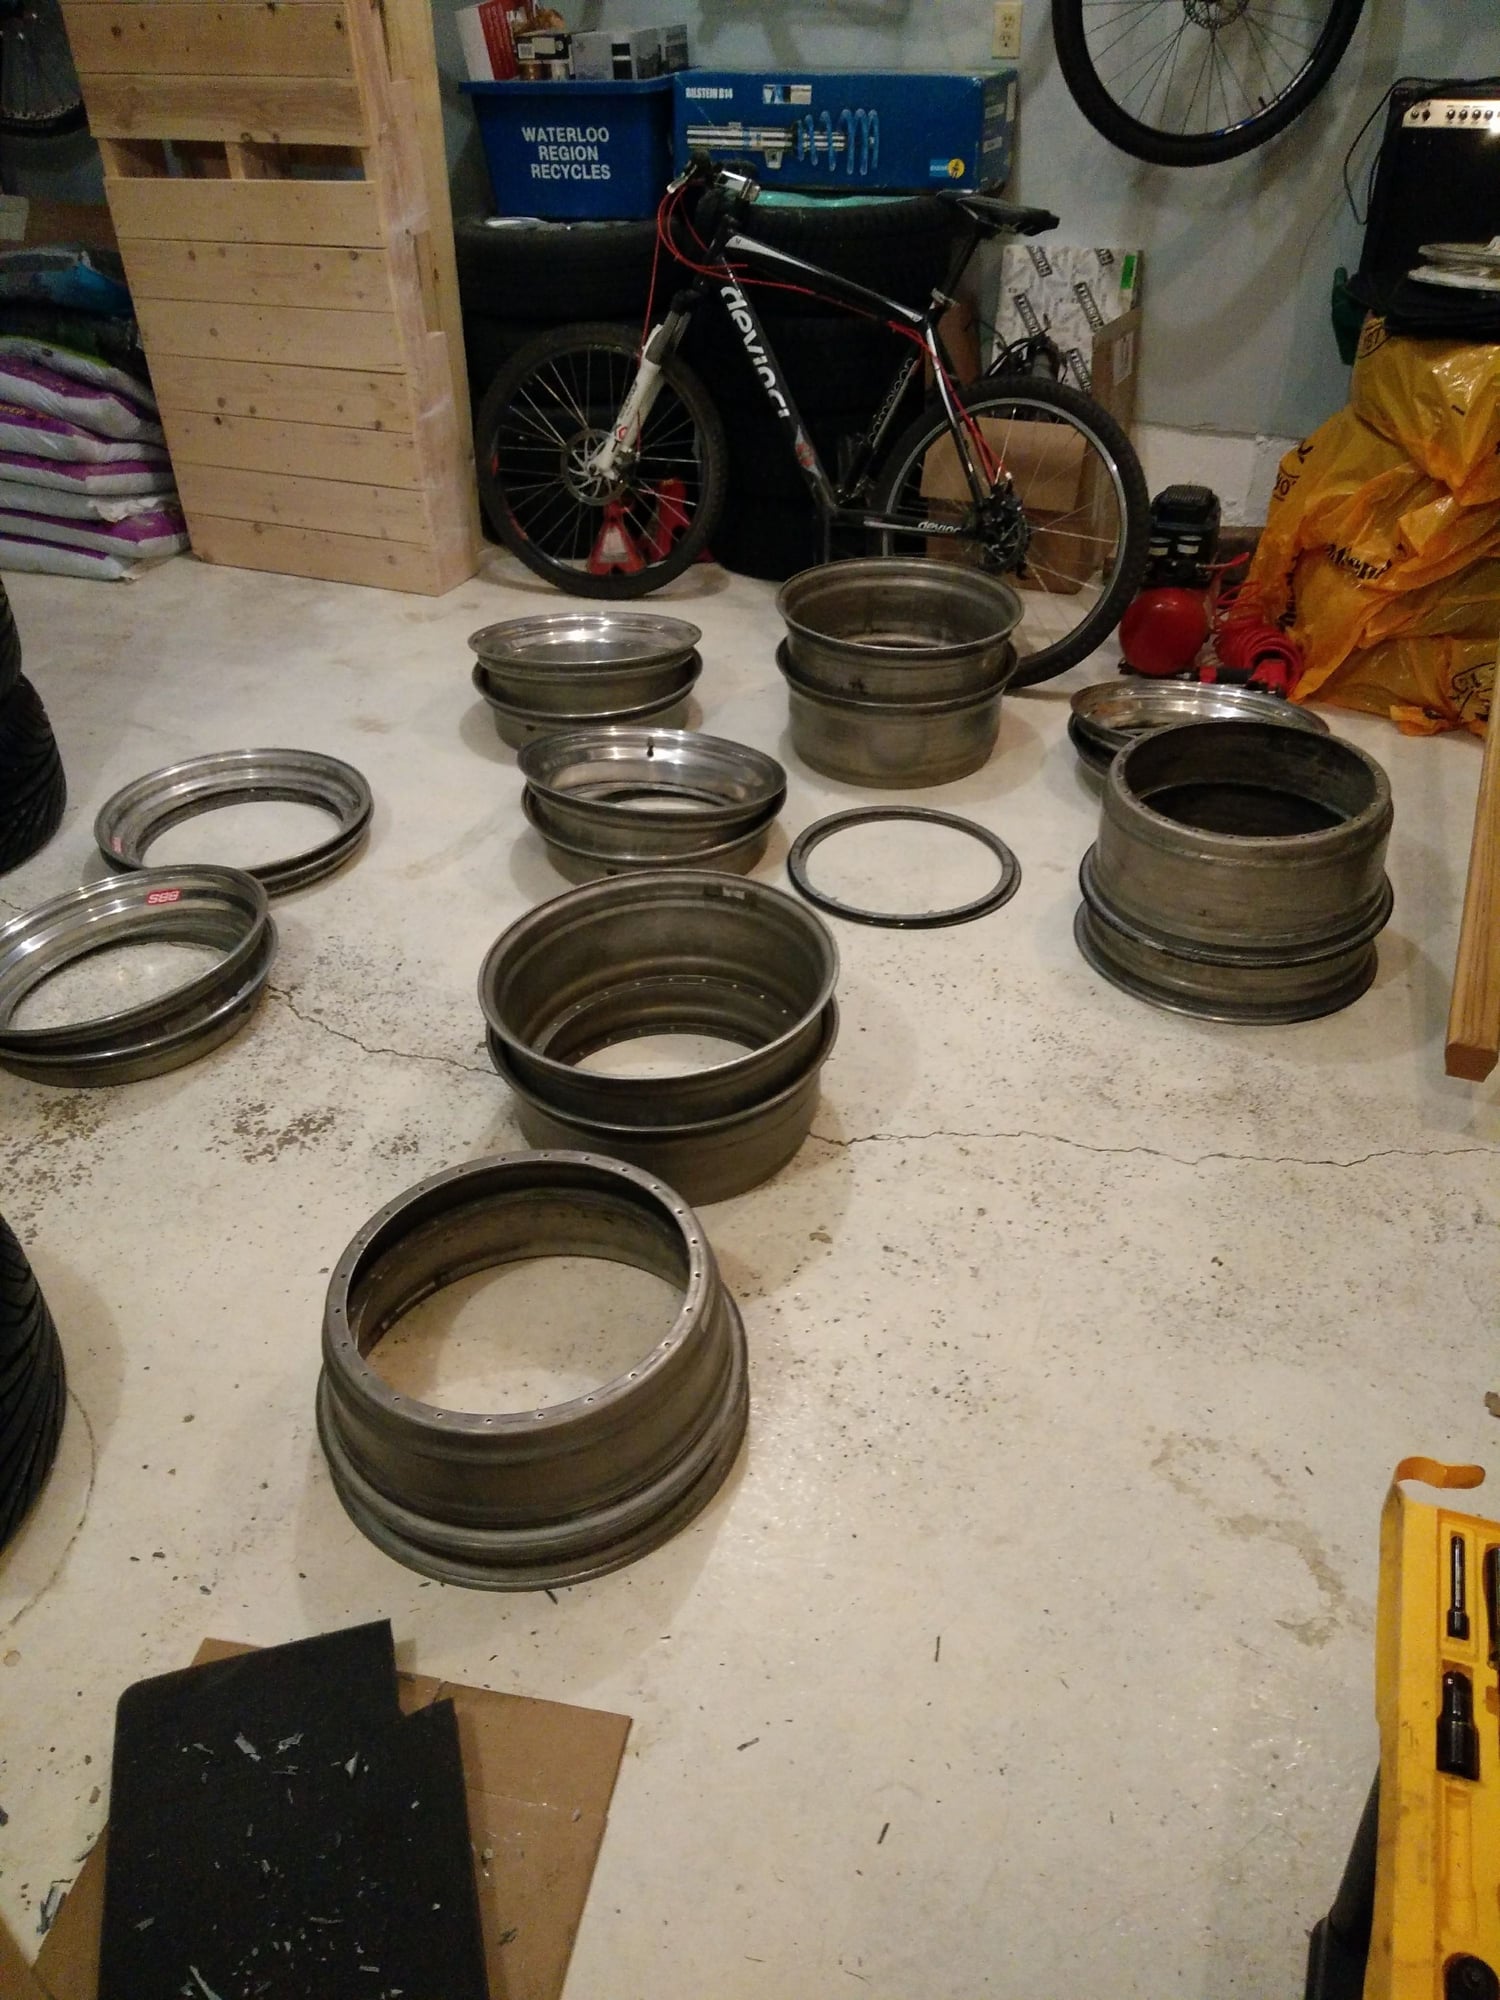 Wheels and Tires/Axles - BBS Motorsports and misc wheels and parts - Used - 0  All Models - Waterloo, ON N2V1K8, Canada